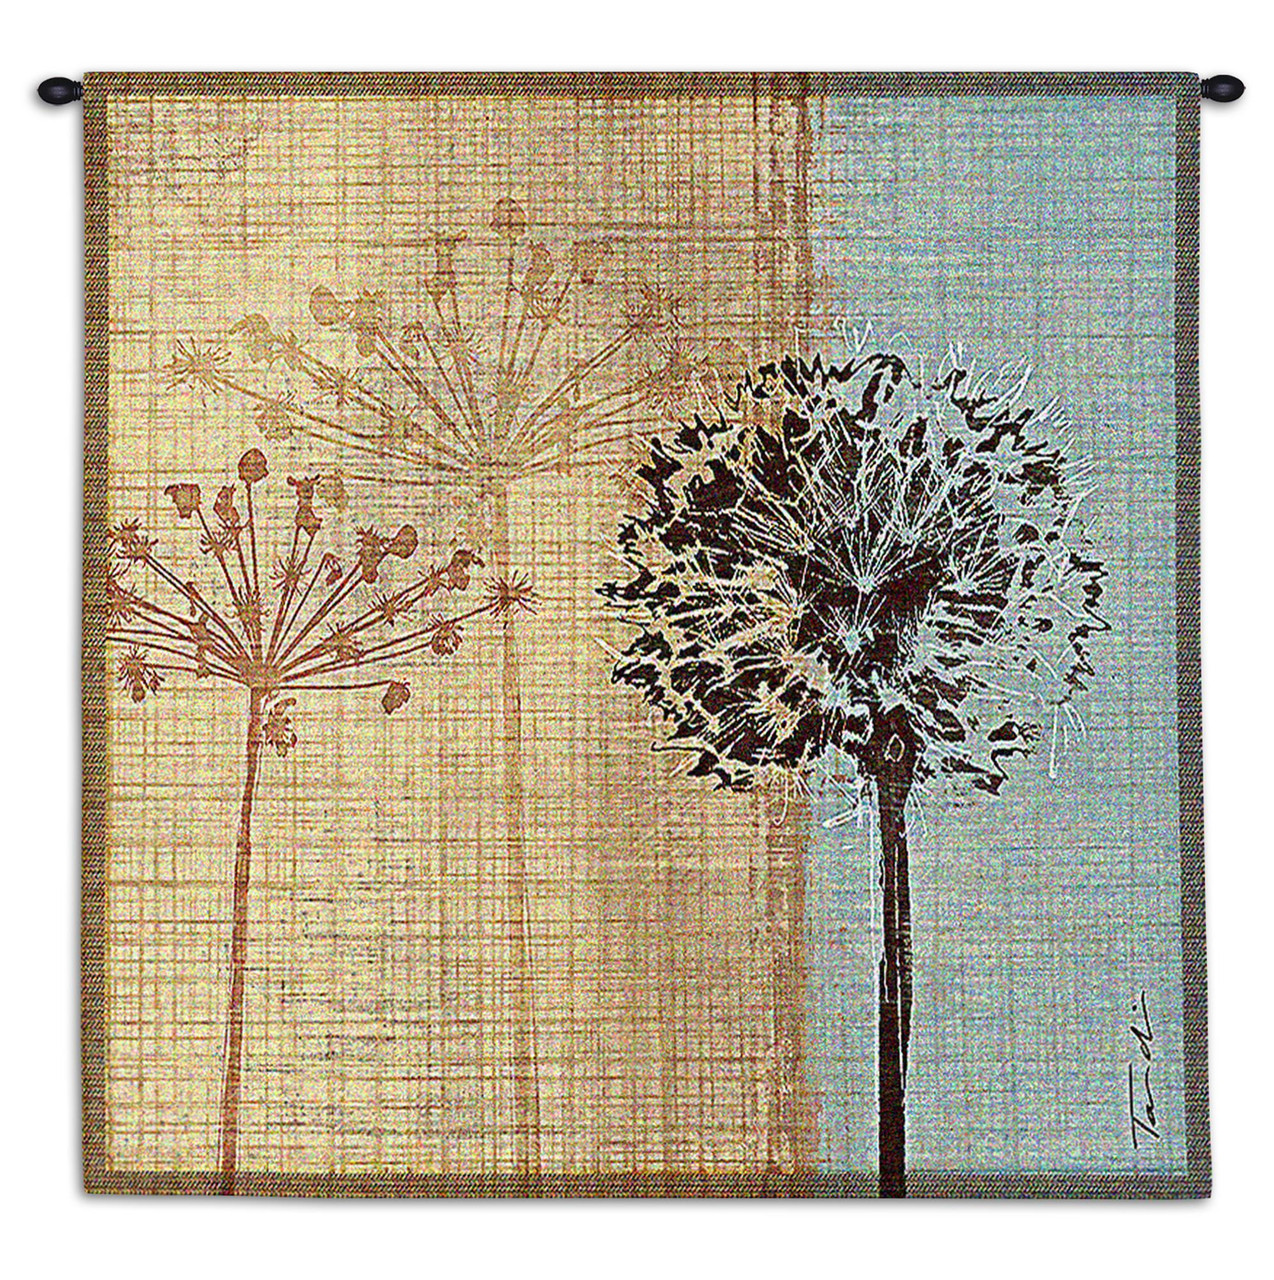 In the Breeze by Tandi Venter Woven Tapestry Wall Art Hanging Botanical  Dandelion Theme 100% Cotton USA Size 35x35